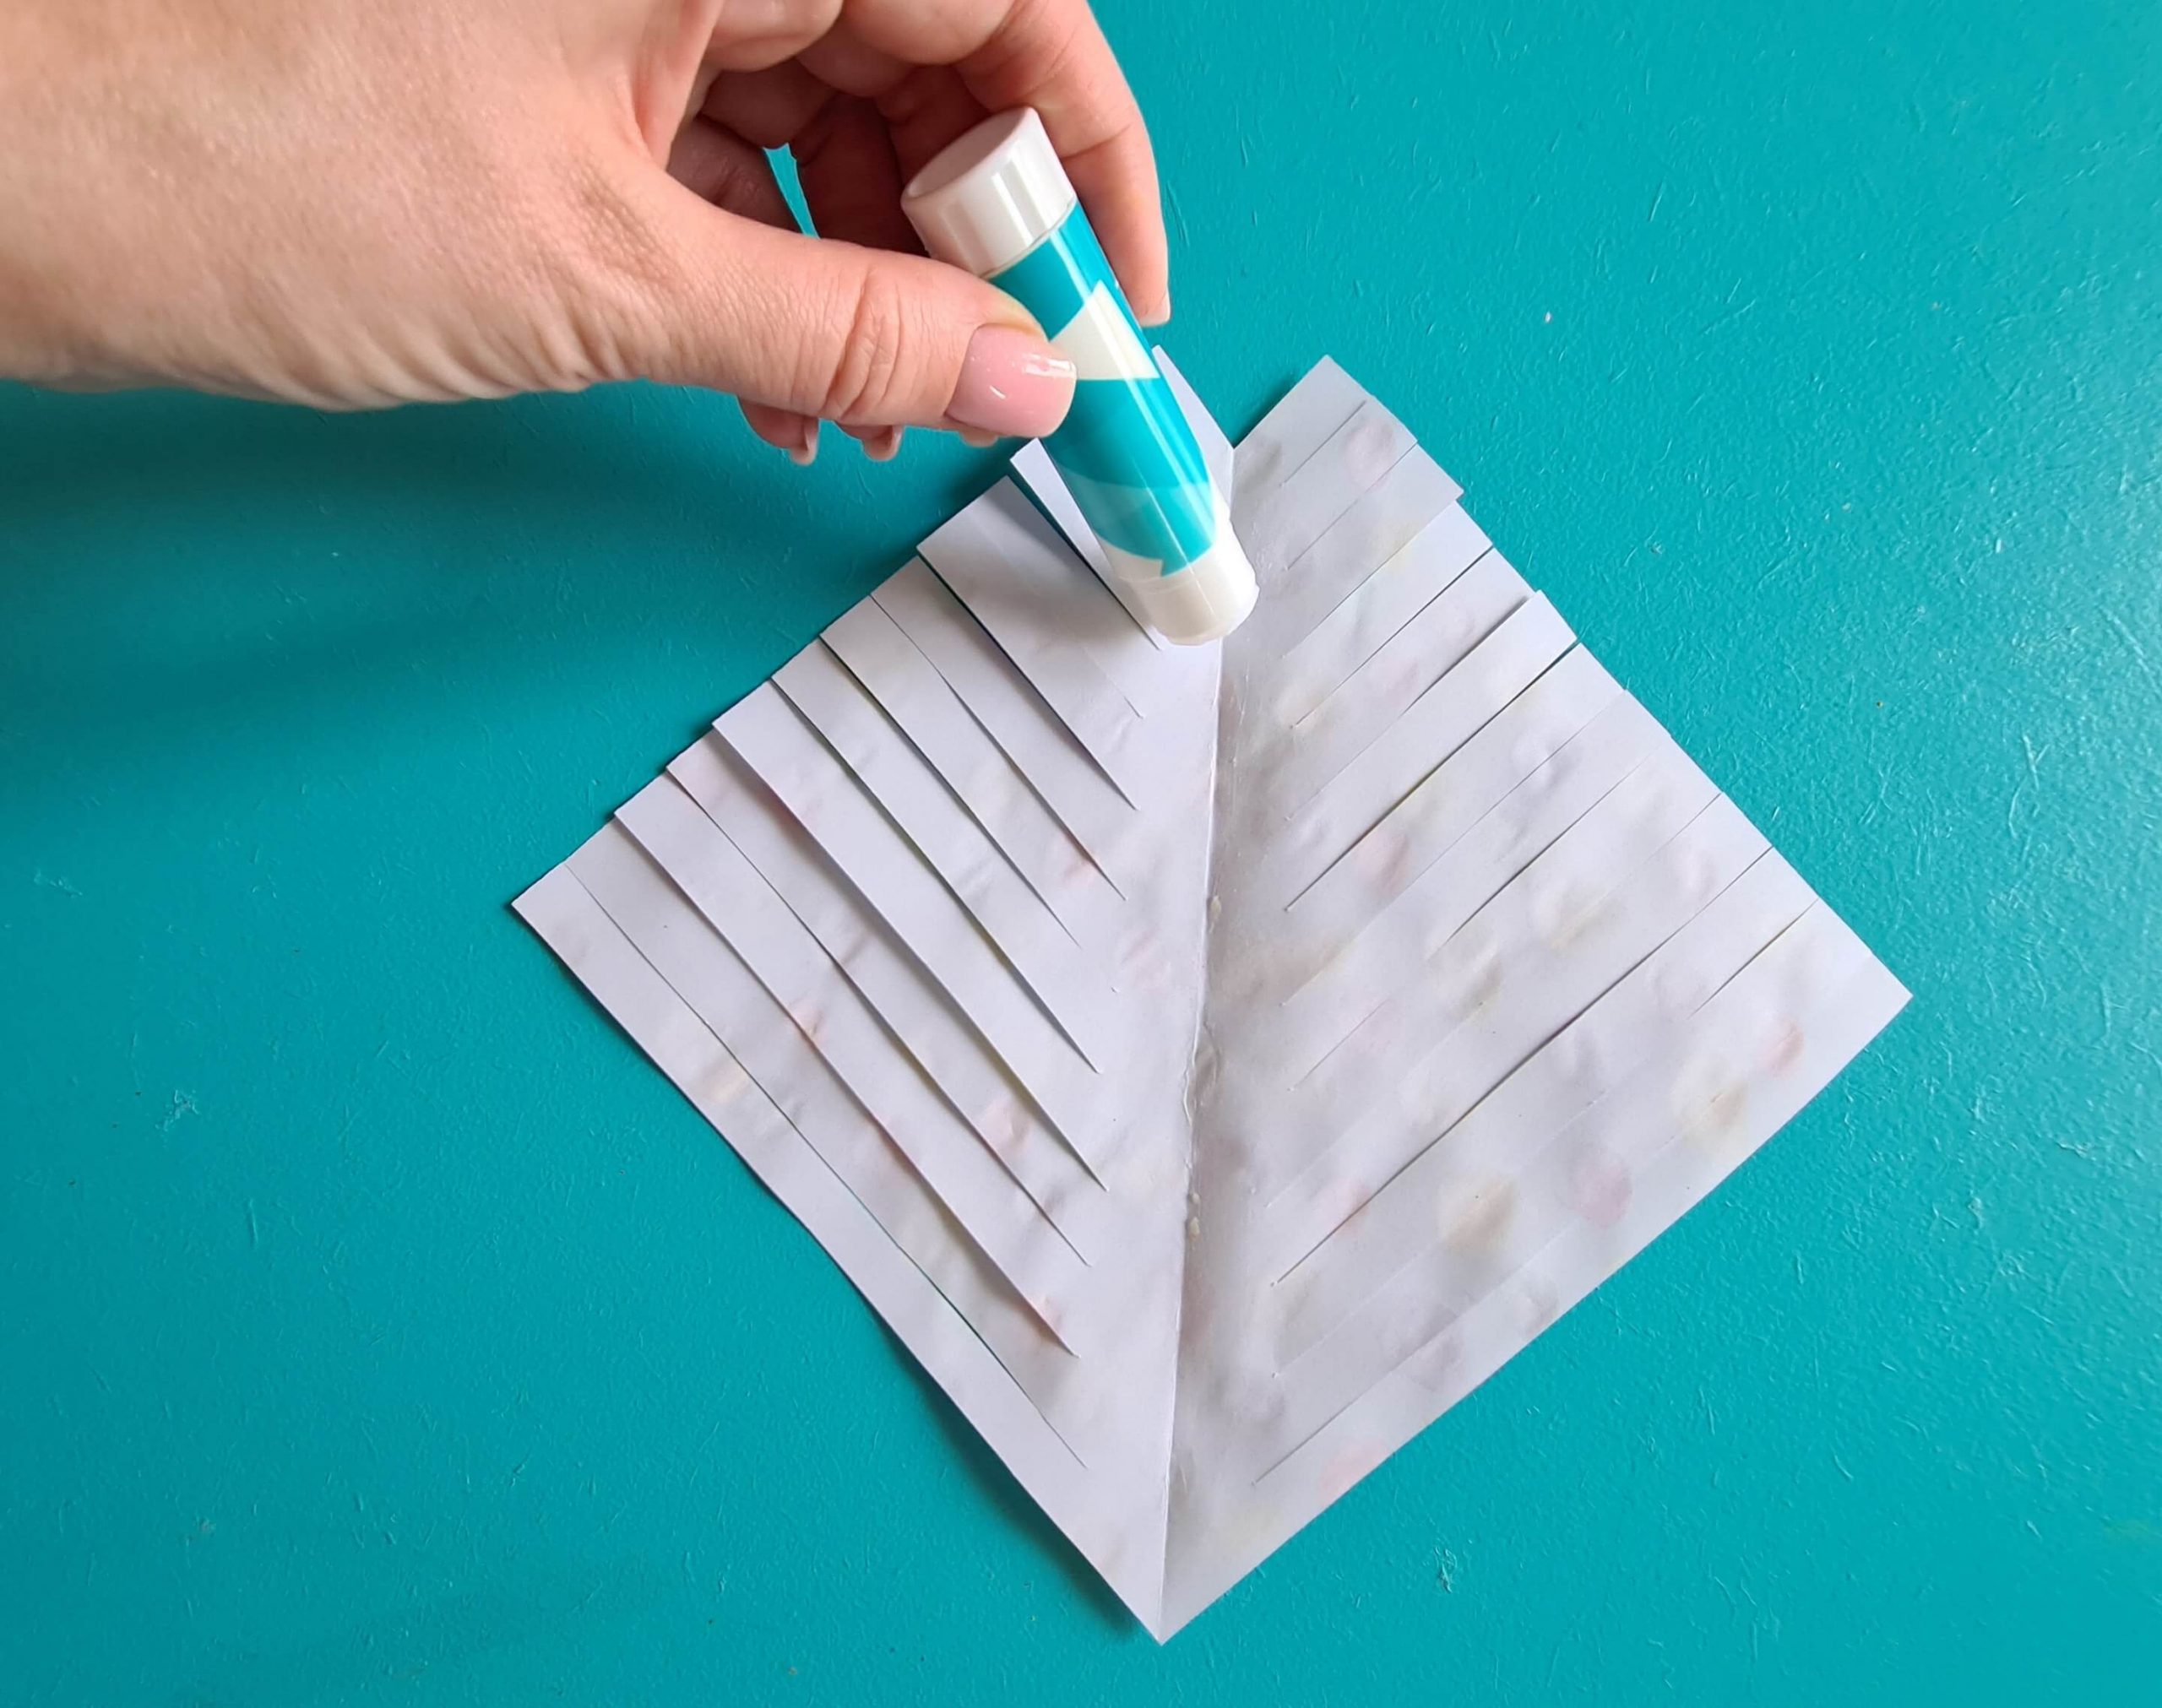 applying glue to the back of the paper